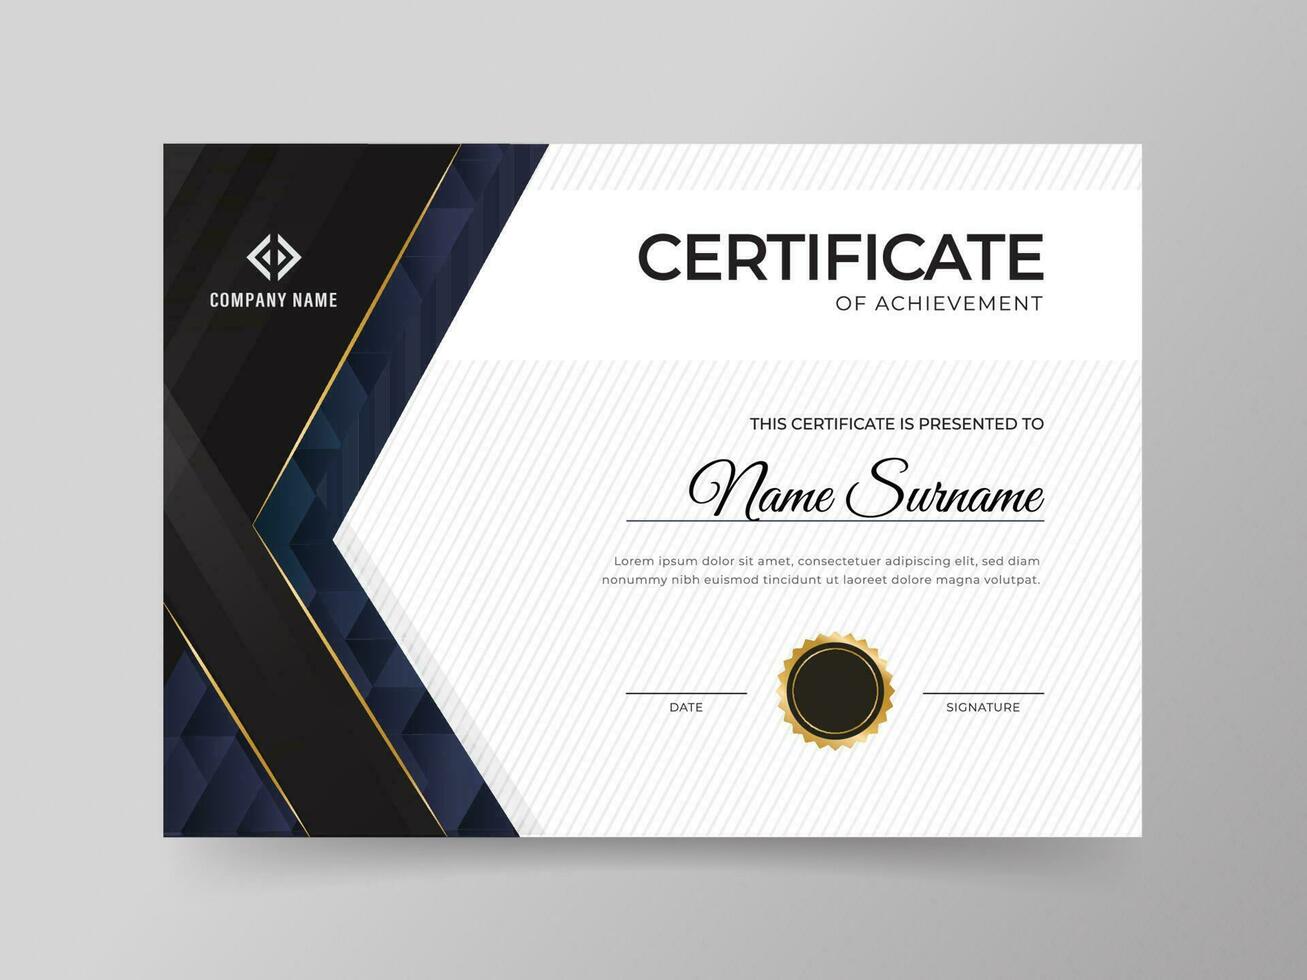 Best Award Certificate Of Achievement Template Layout In Black And White Color. vector